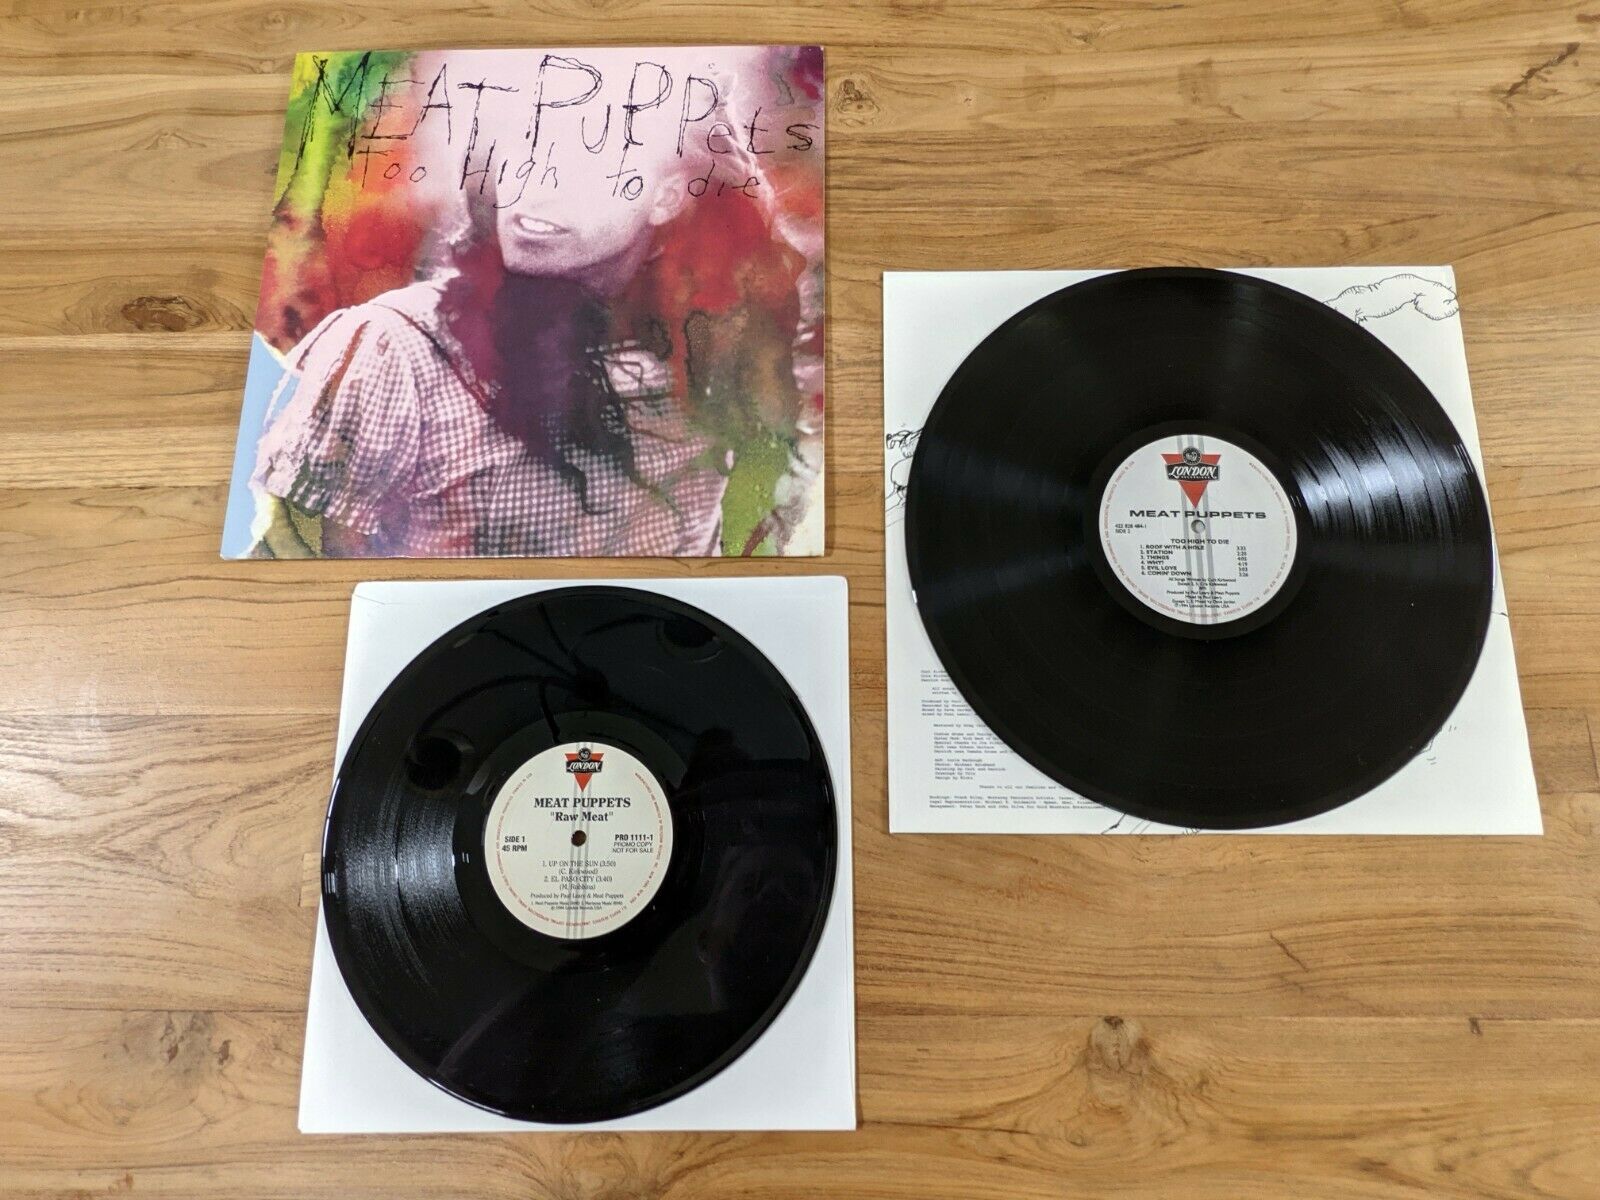 popsike.com - Meat Puppets - Too High To Die 1994 Vinyl LP - Raw Meat 10"  Promo - Never Played - auction details